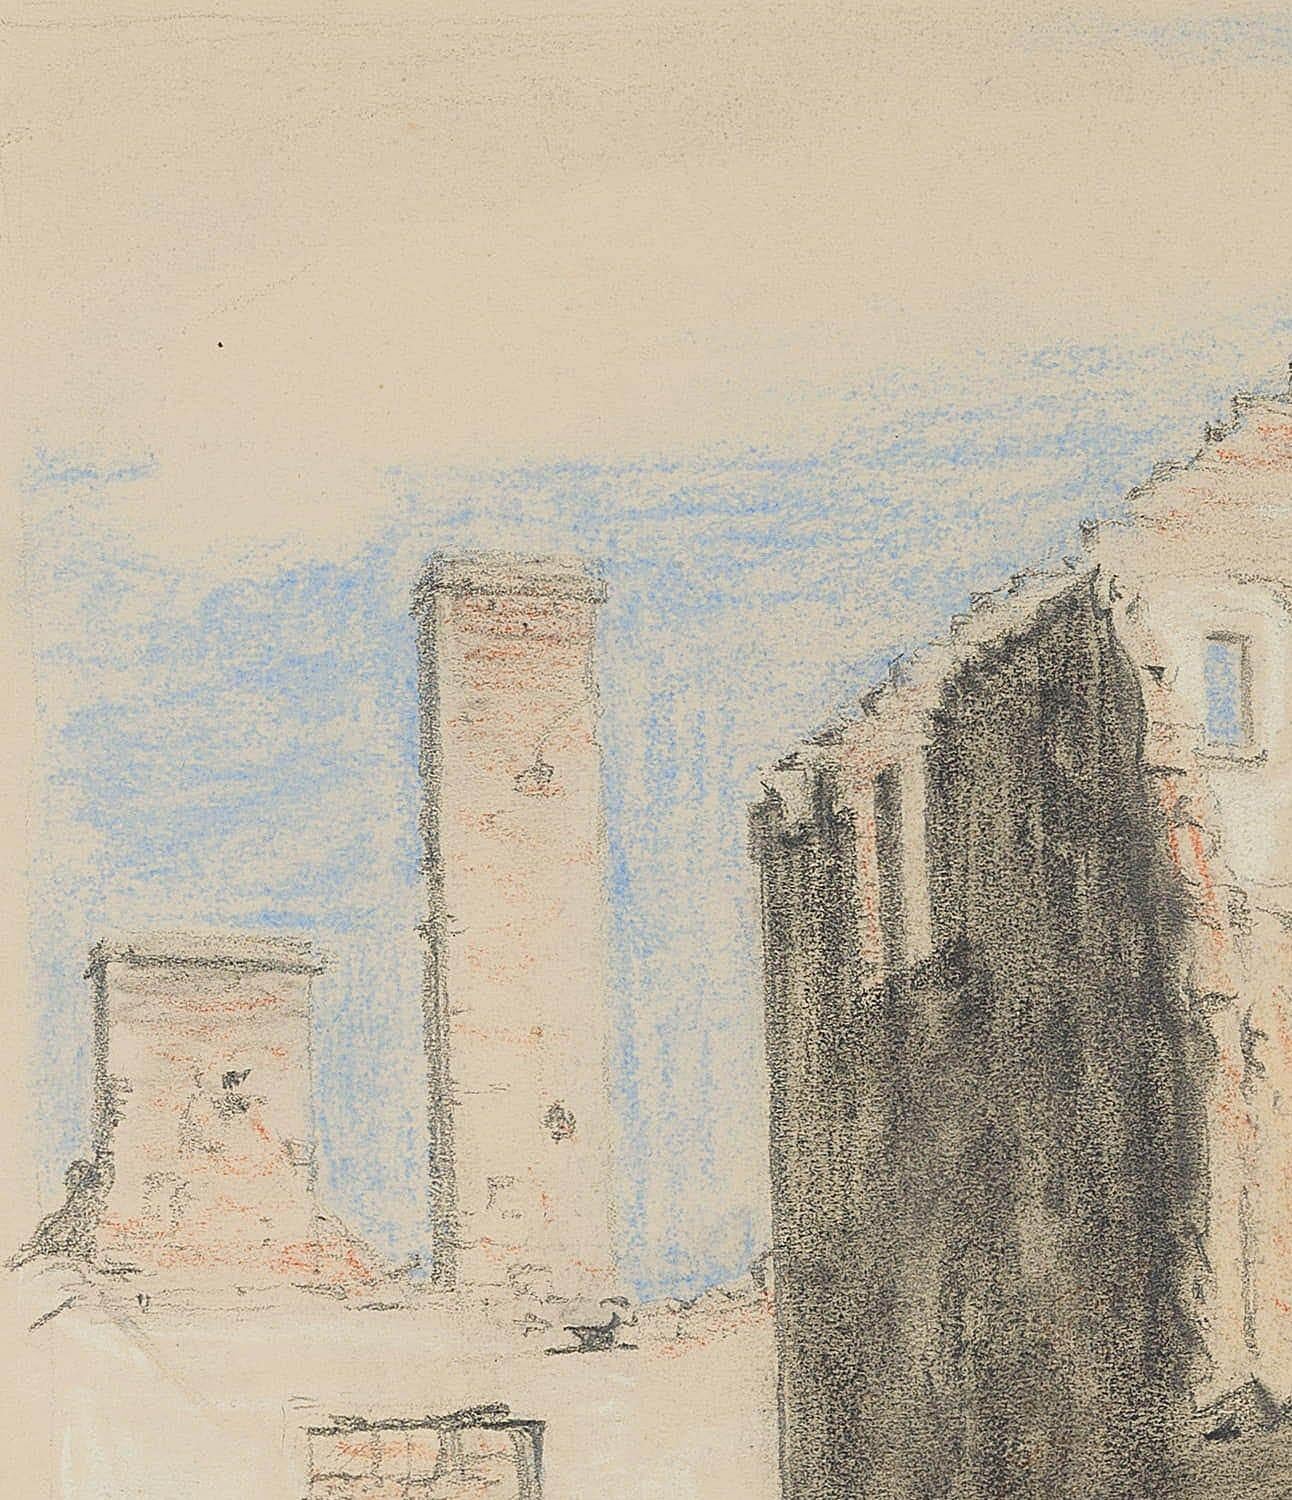 Carl August Walther (1880 Leipzig - 1956 Dresden): Ruined houses in San Gimignano, crumbling brick buildings, 20th century, Charcoal

Technique: White heightened Charcoal and Chalk on Paper

Stamp: Lower left Estate stamp, Carl Walther. Dresden.